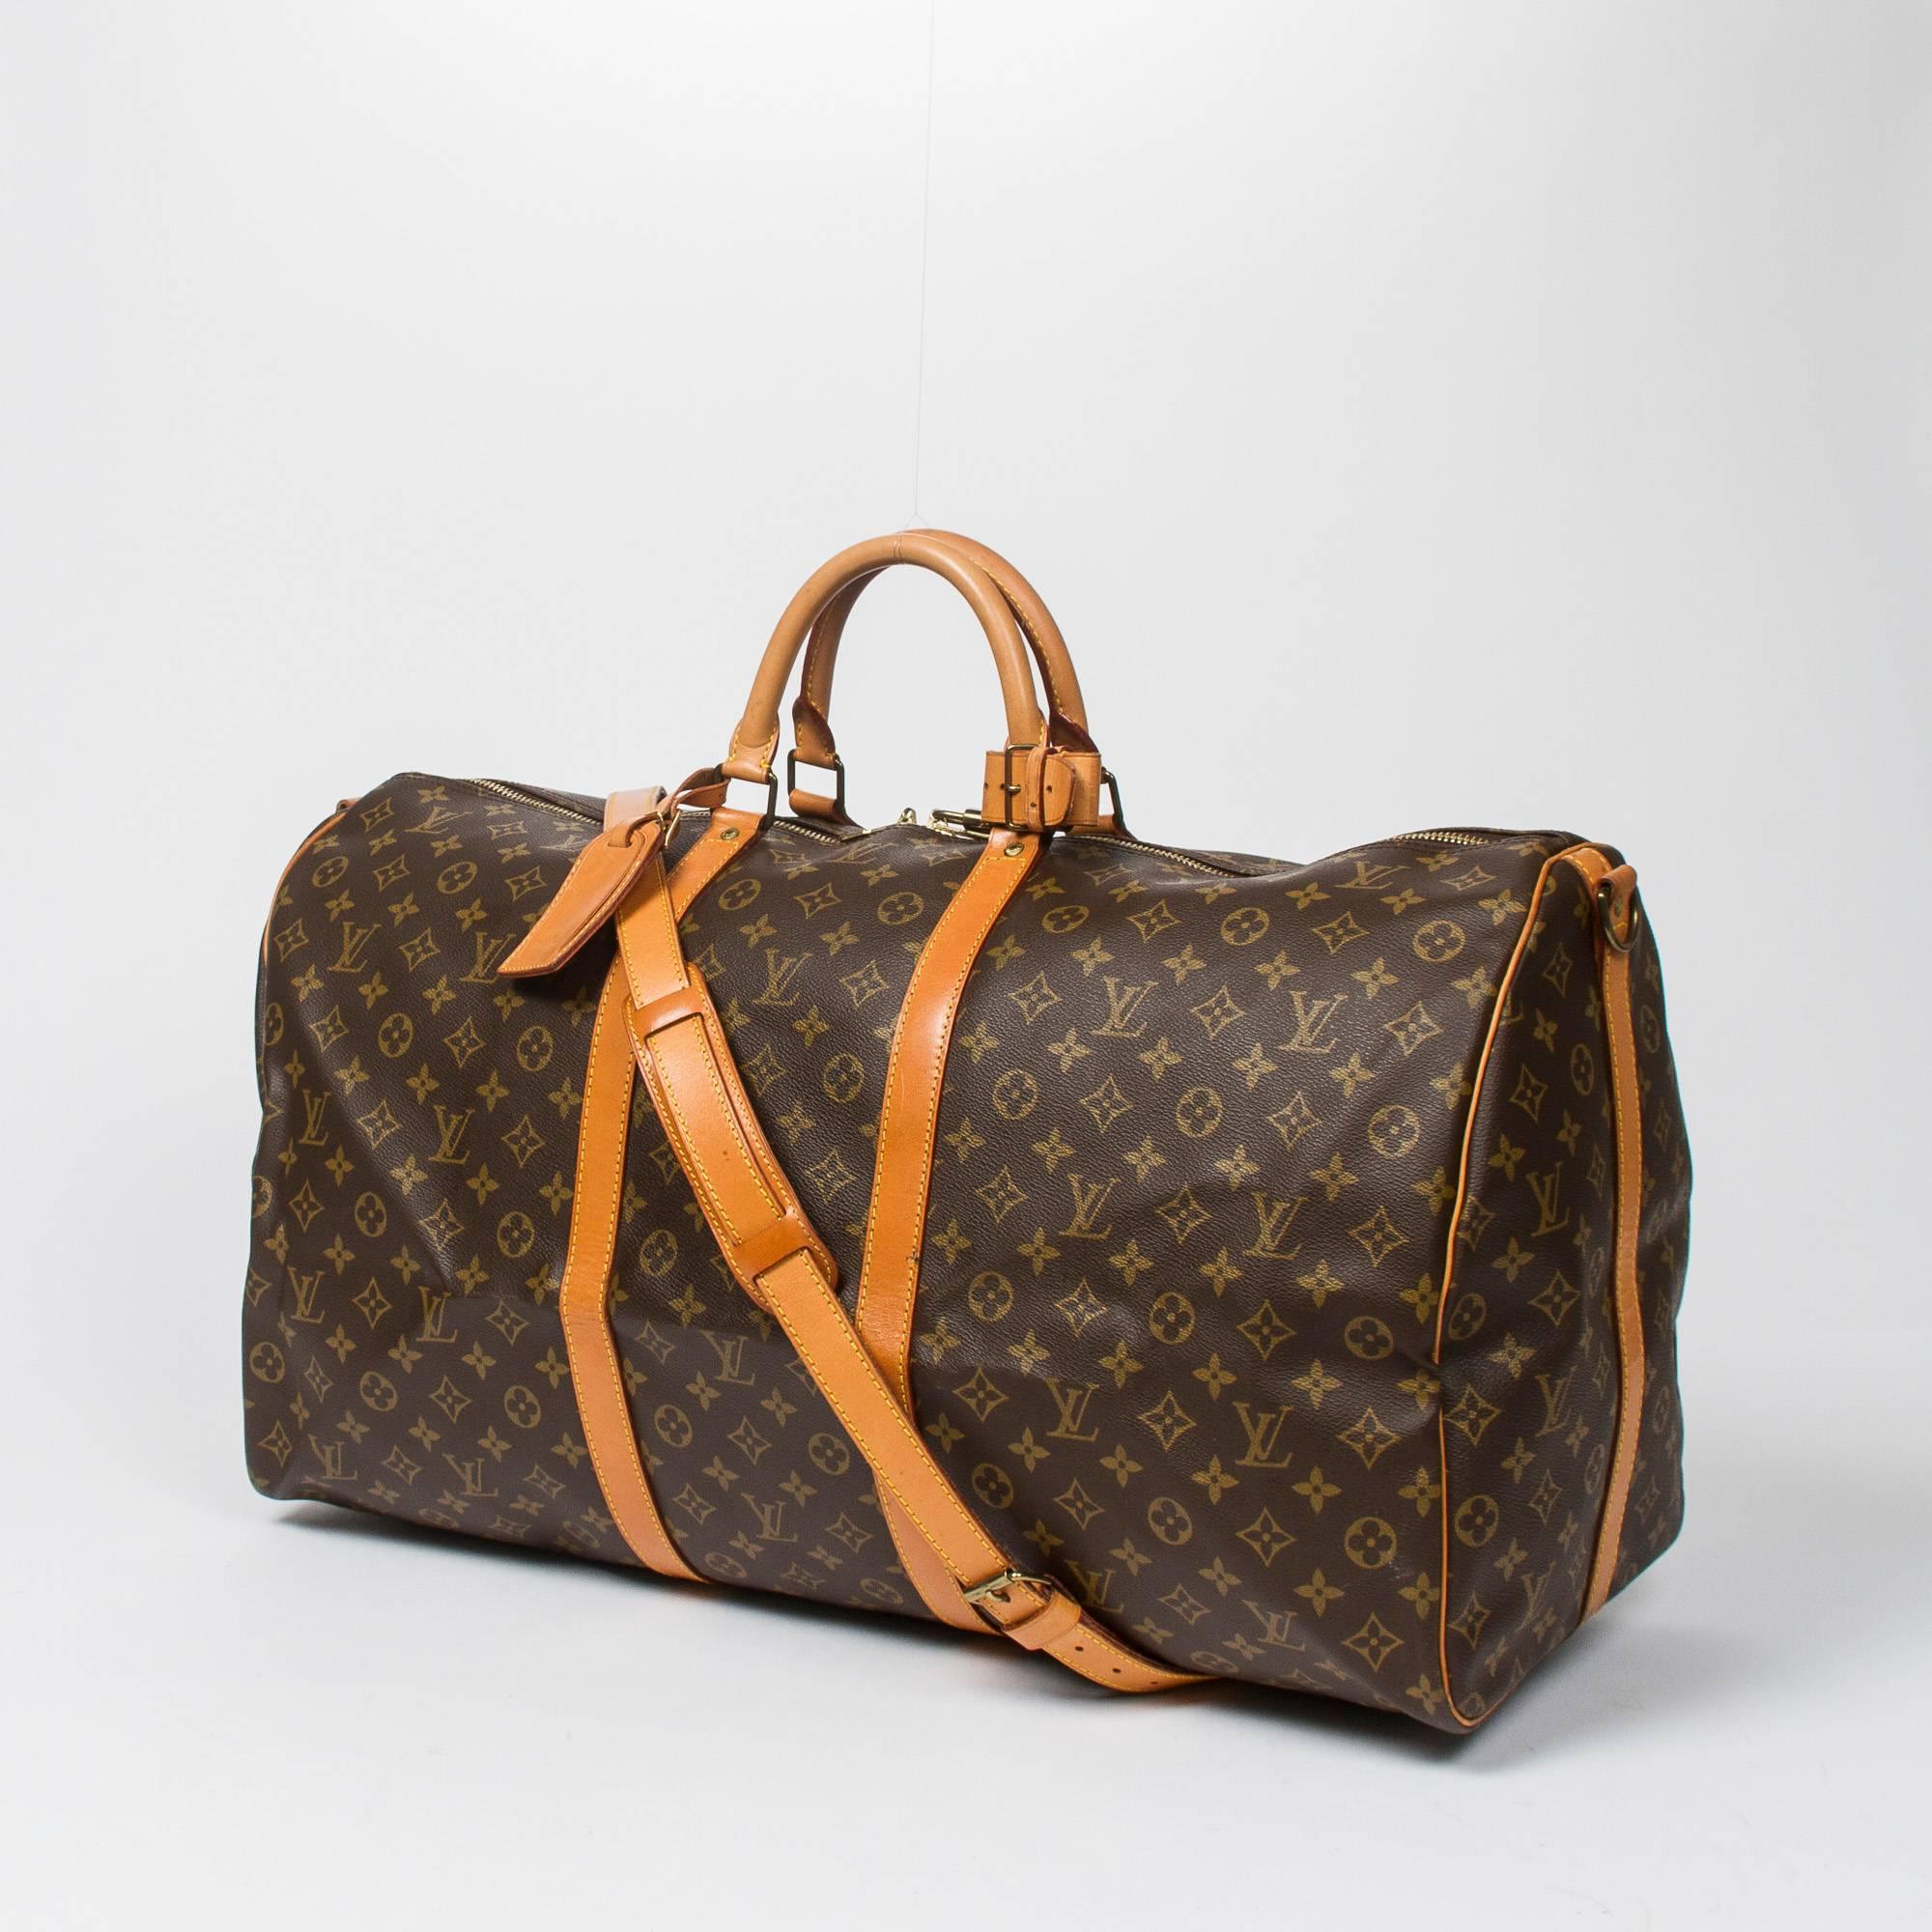 Keepall Bandouliere 60 in monogram canvas, vachetta leather shoulder strap handles and trimmings. Golden brass hardware. Double zipper closure. Brown canvas lining. Luggage tag, handle strap, cadenas no key included. Date code VI0941. Model from